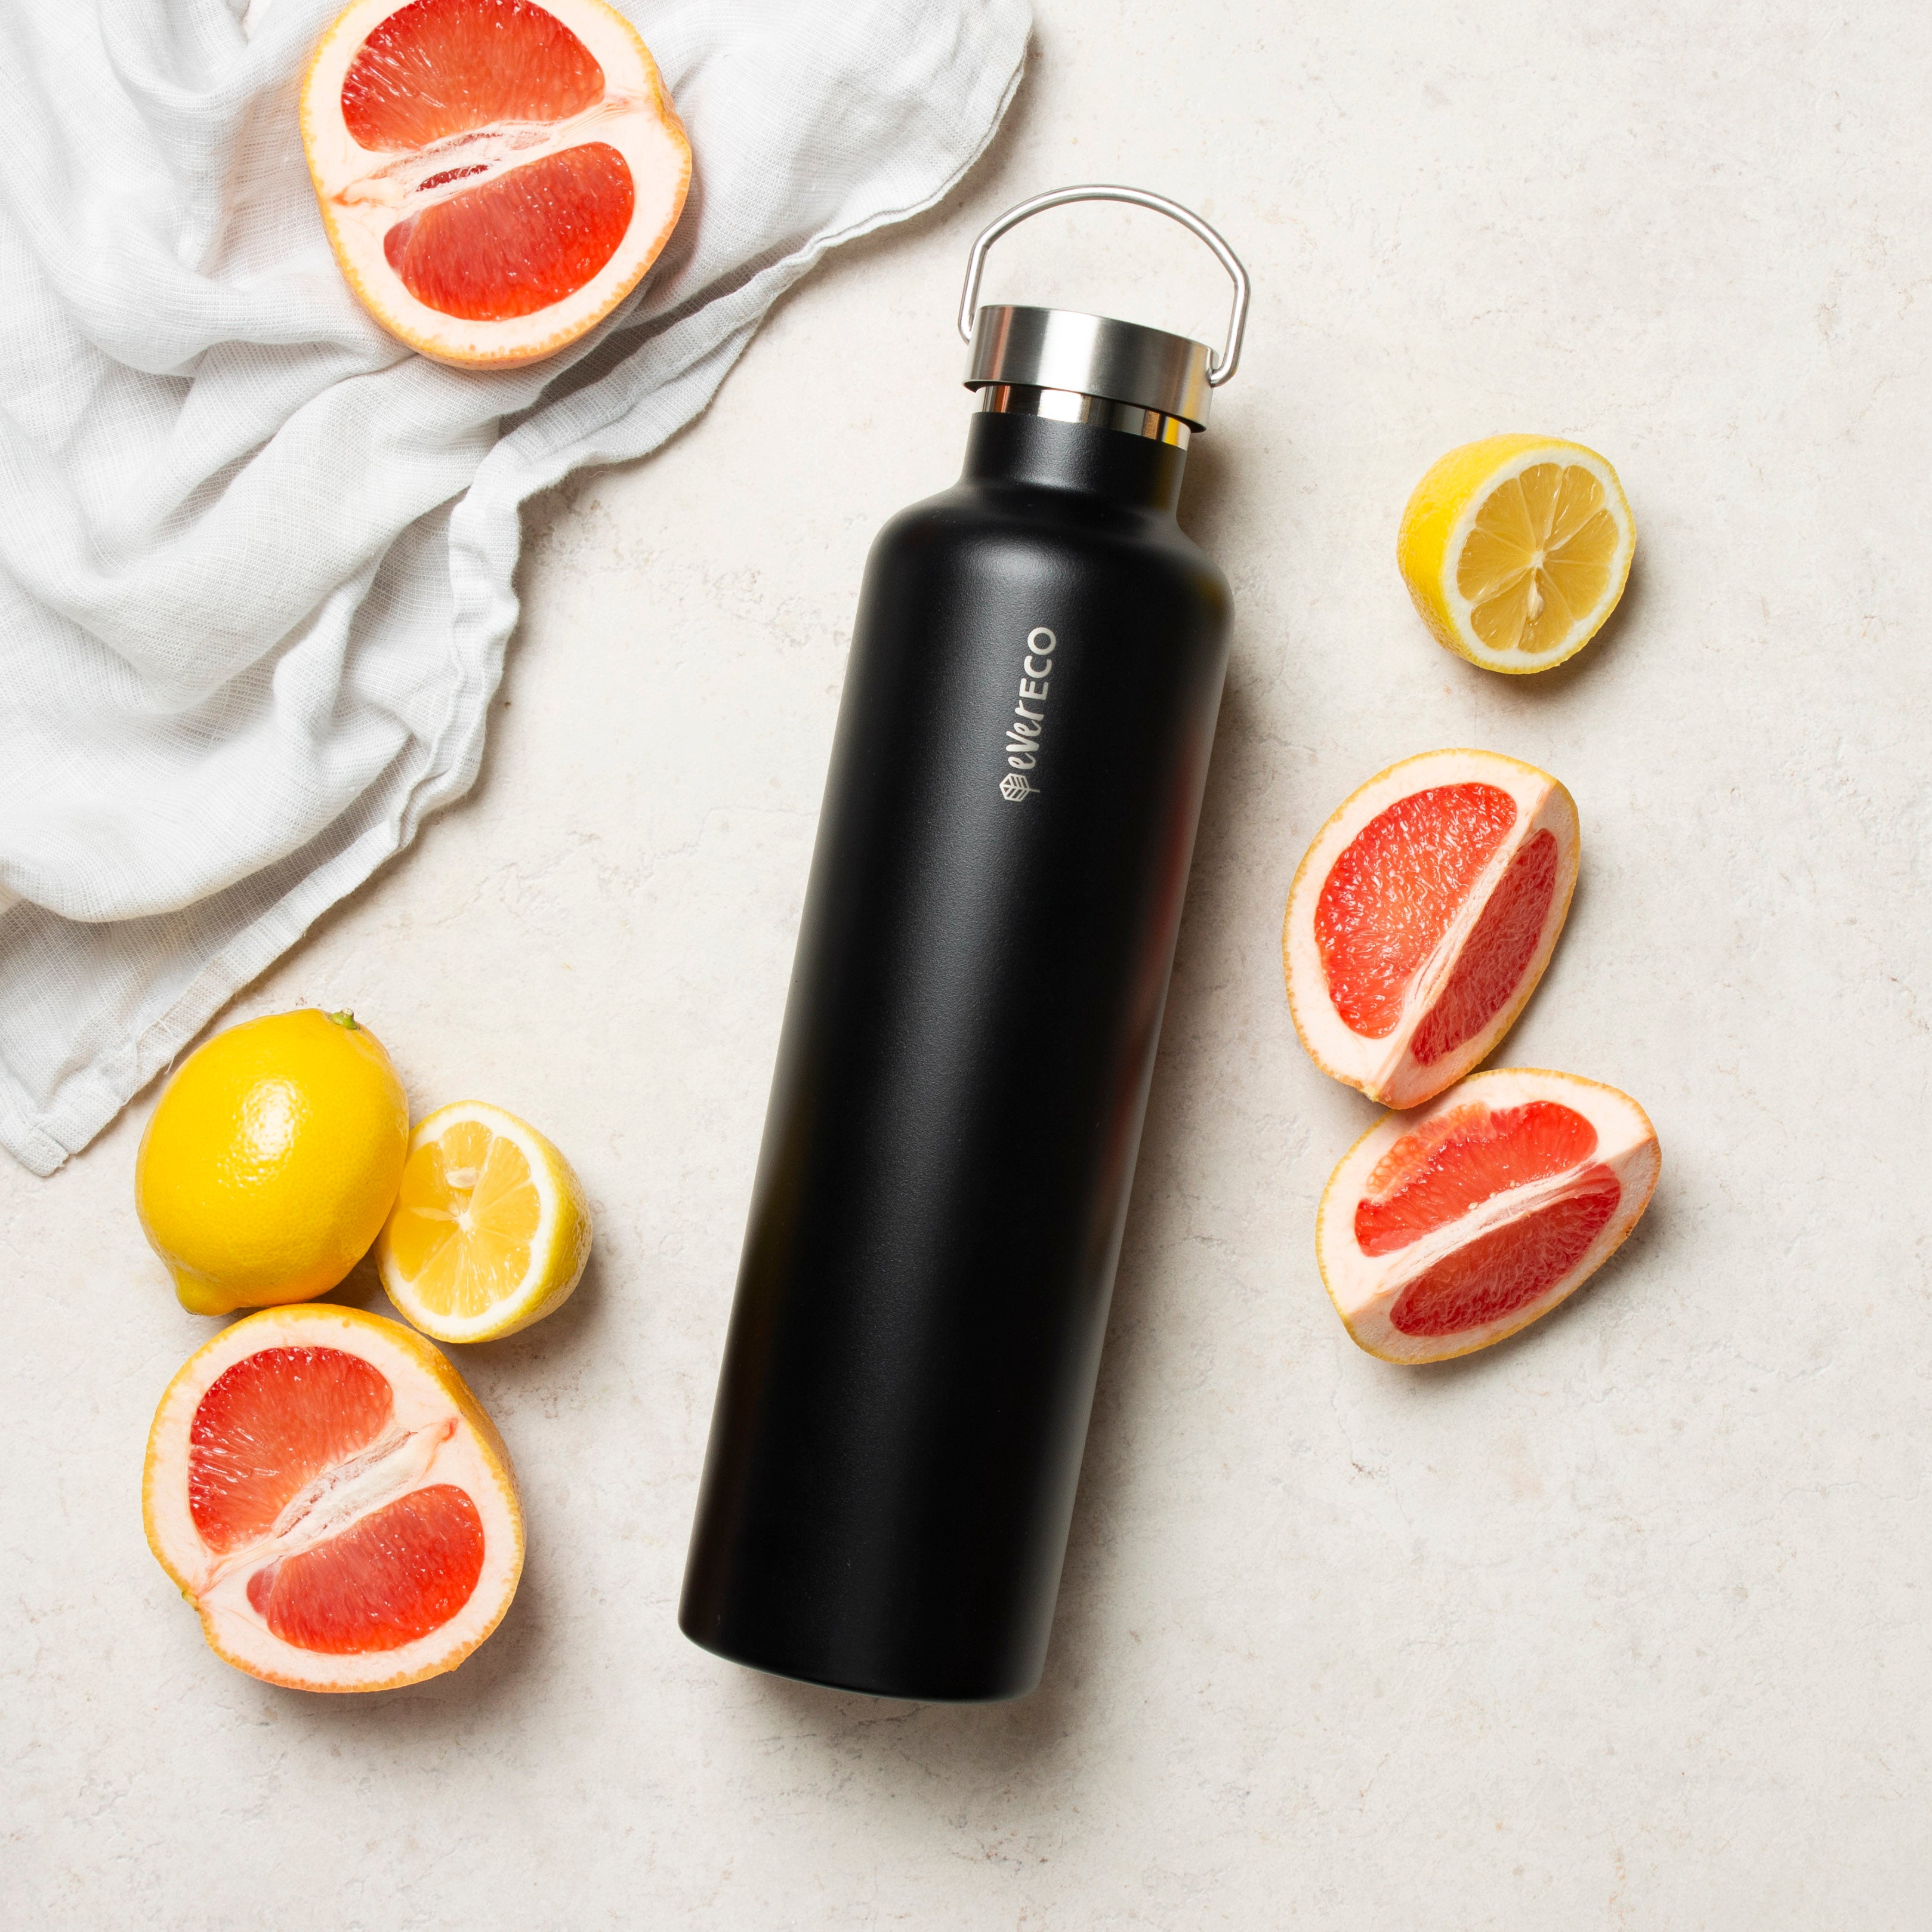 Ever Eco Insulated Drink Bottle Onyx - 1L